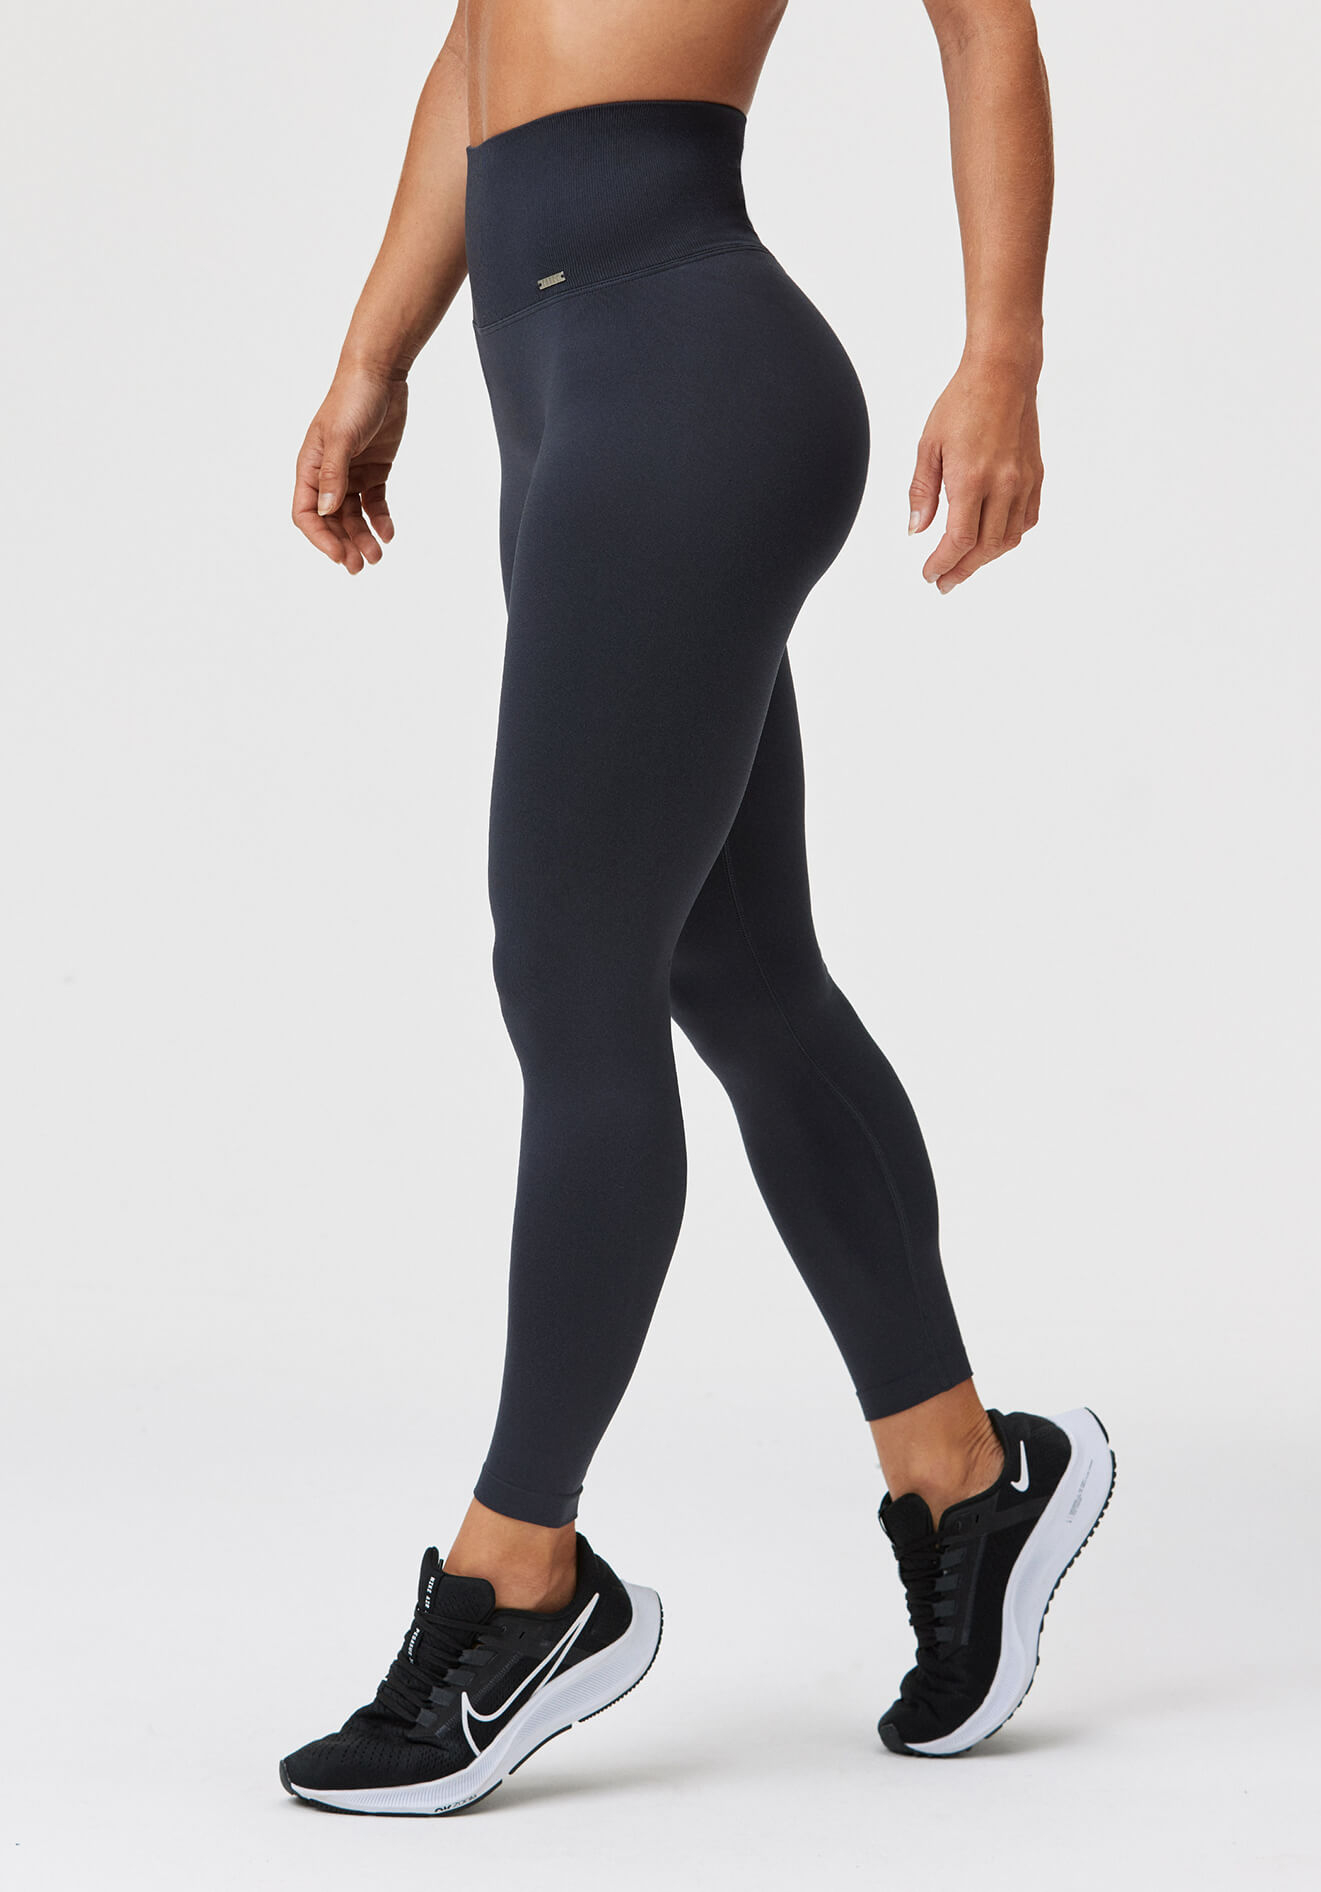 Alera - Ethereal Scrunch Tights - One More Rep